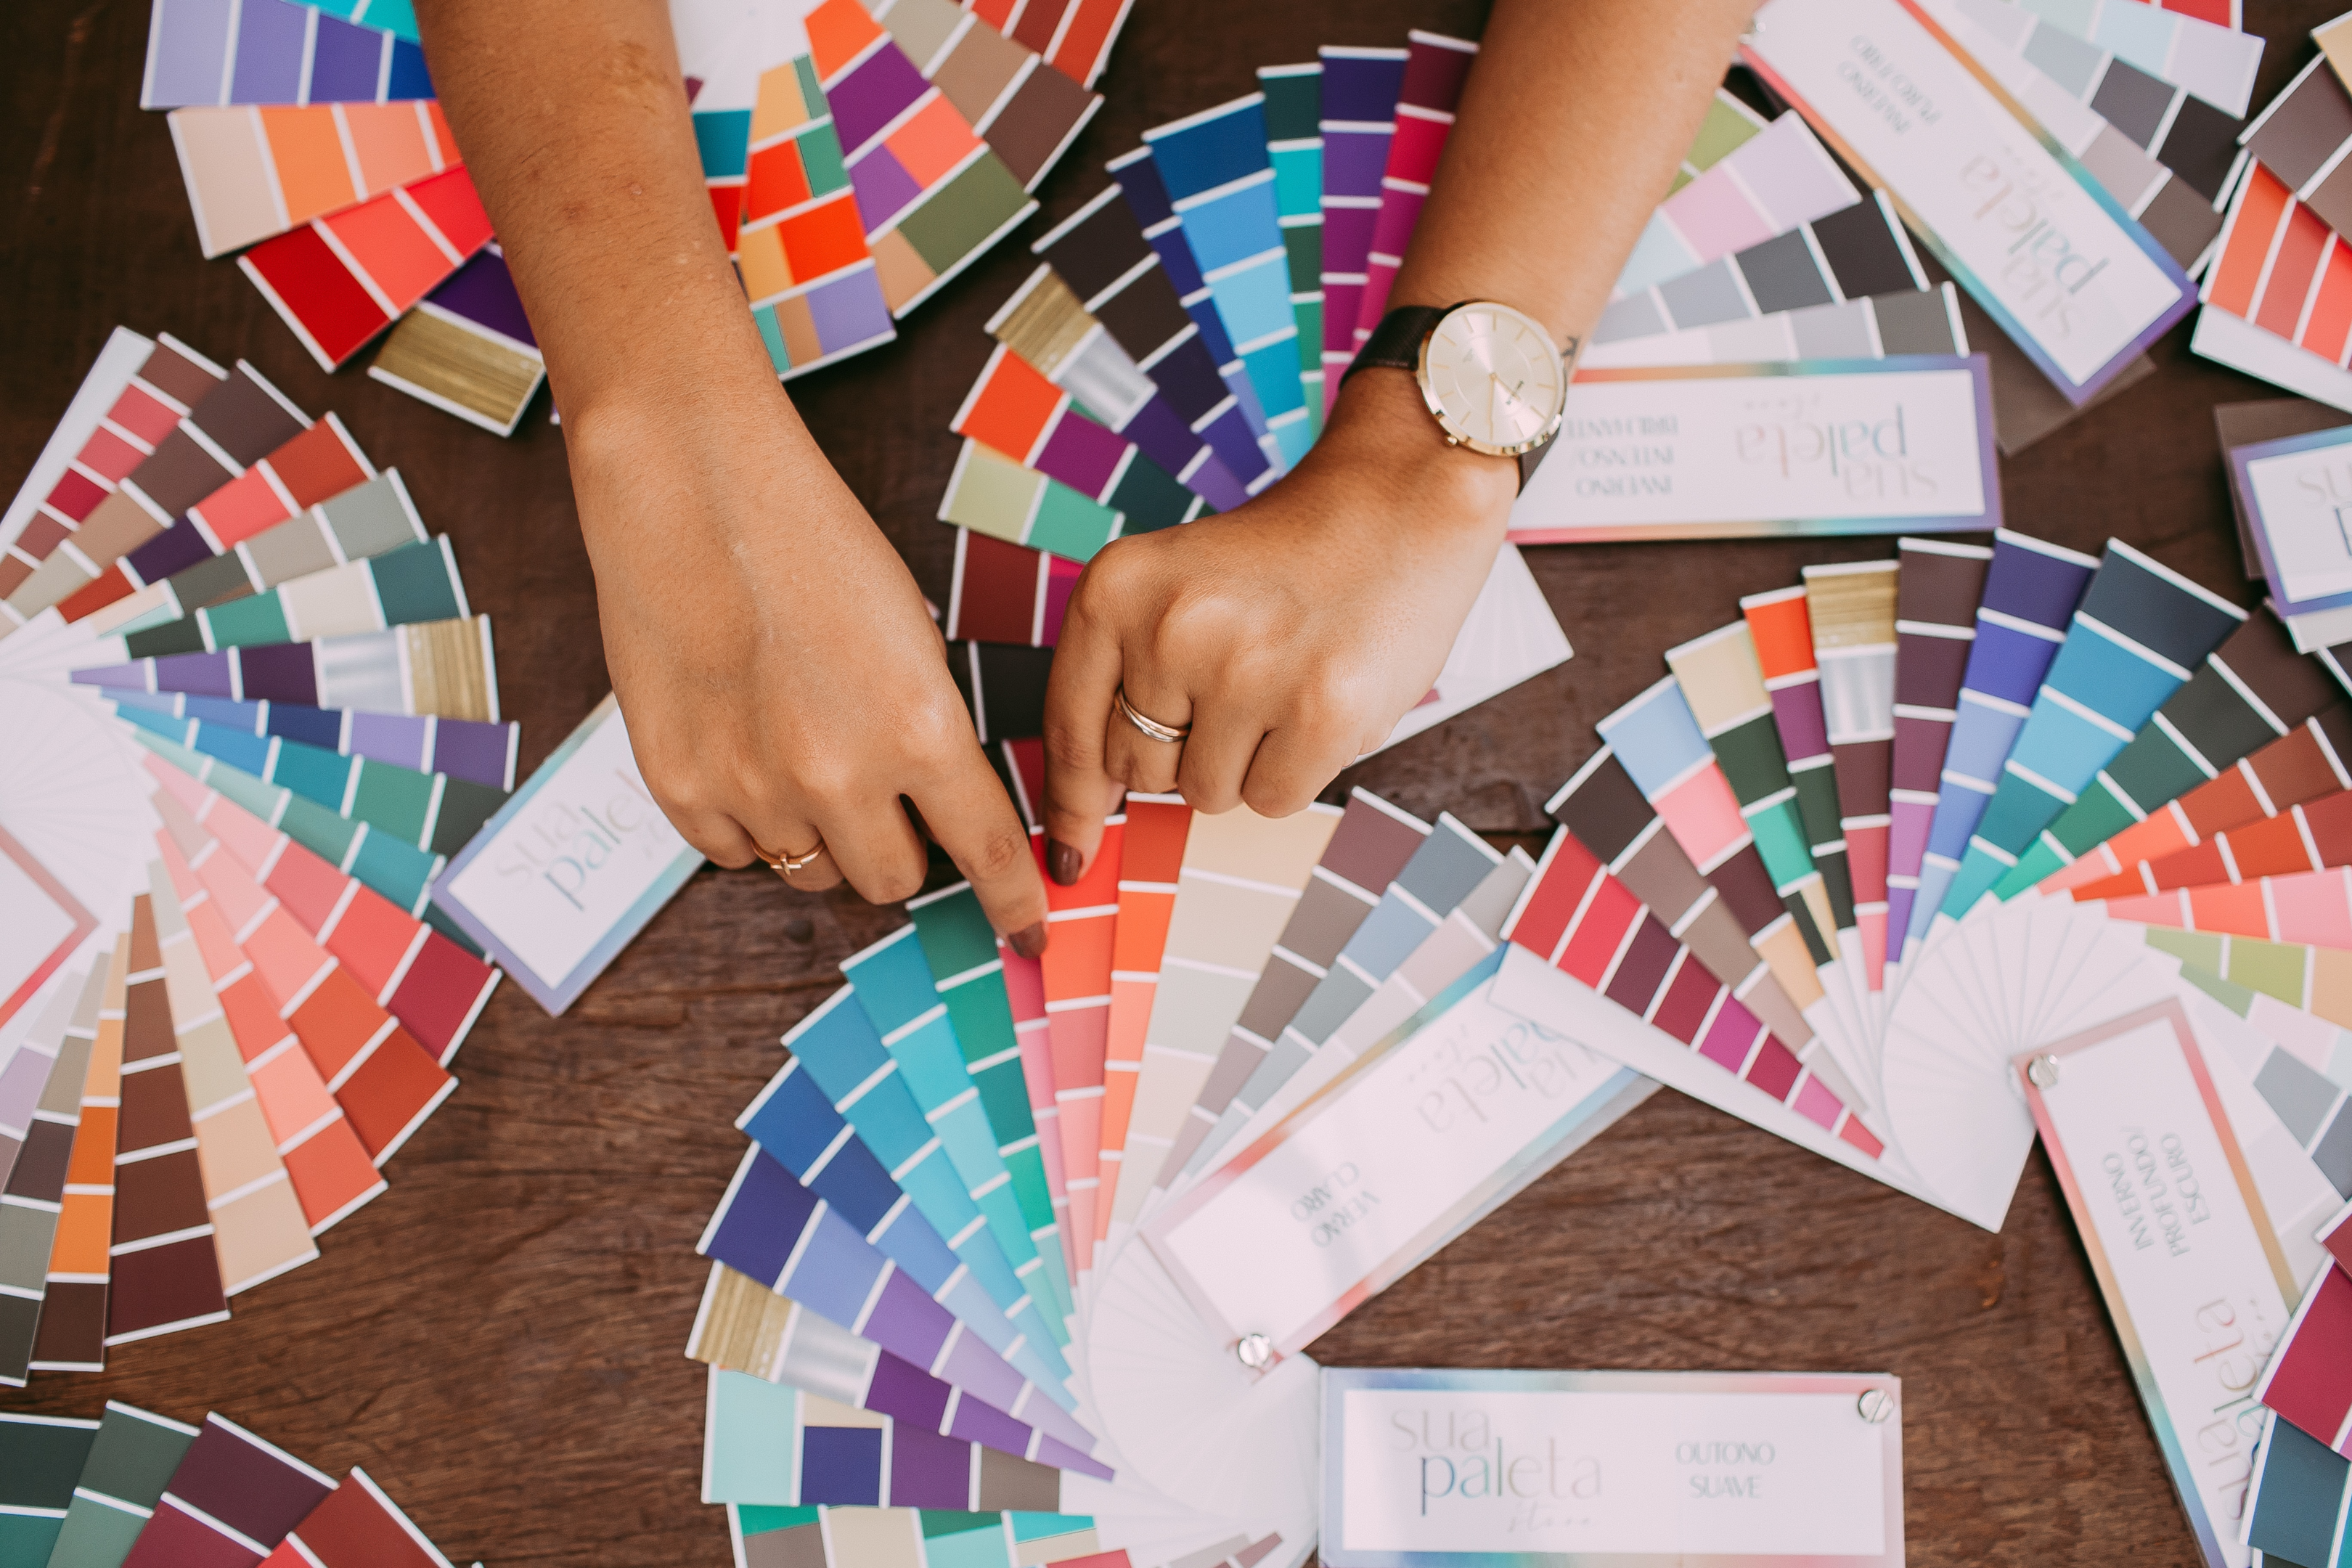 A graphic designer picking colors for her brand logo.